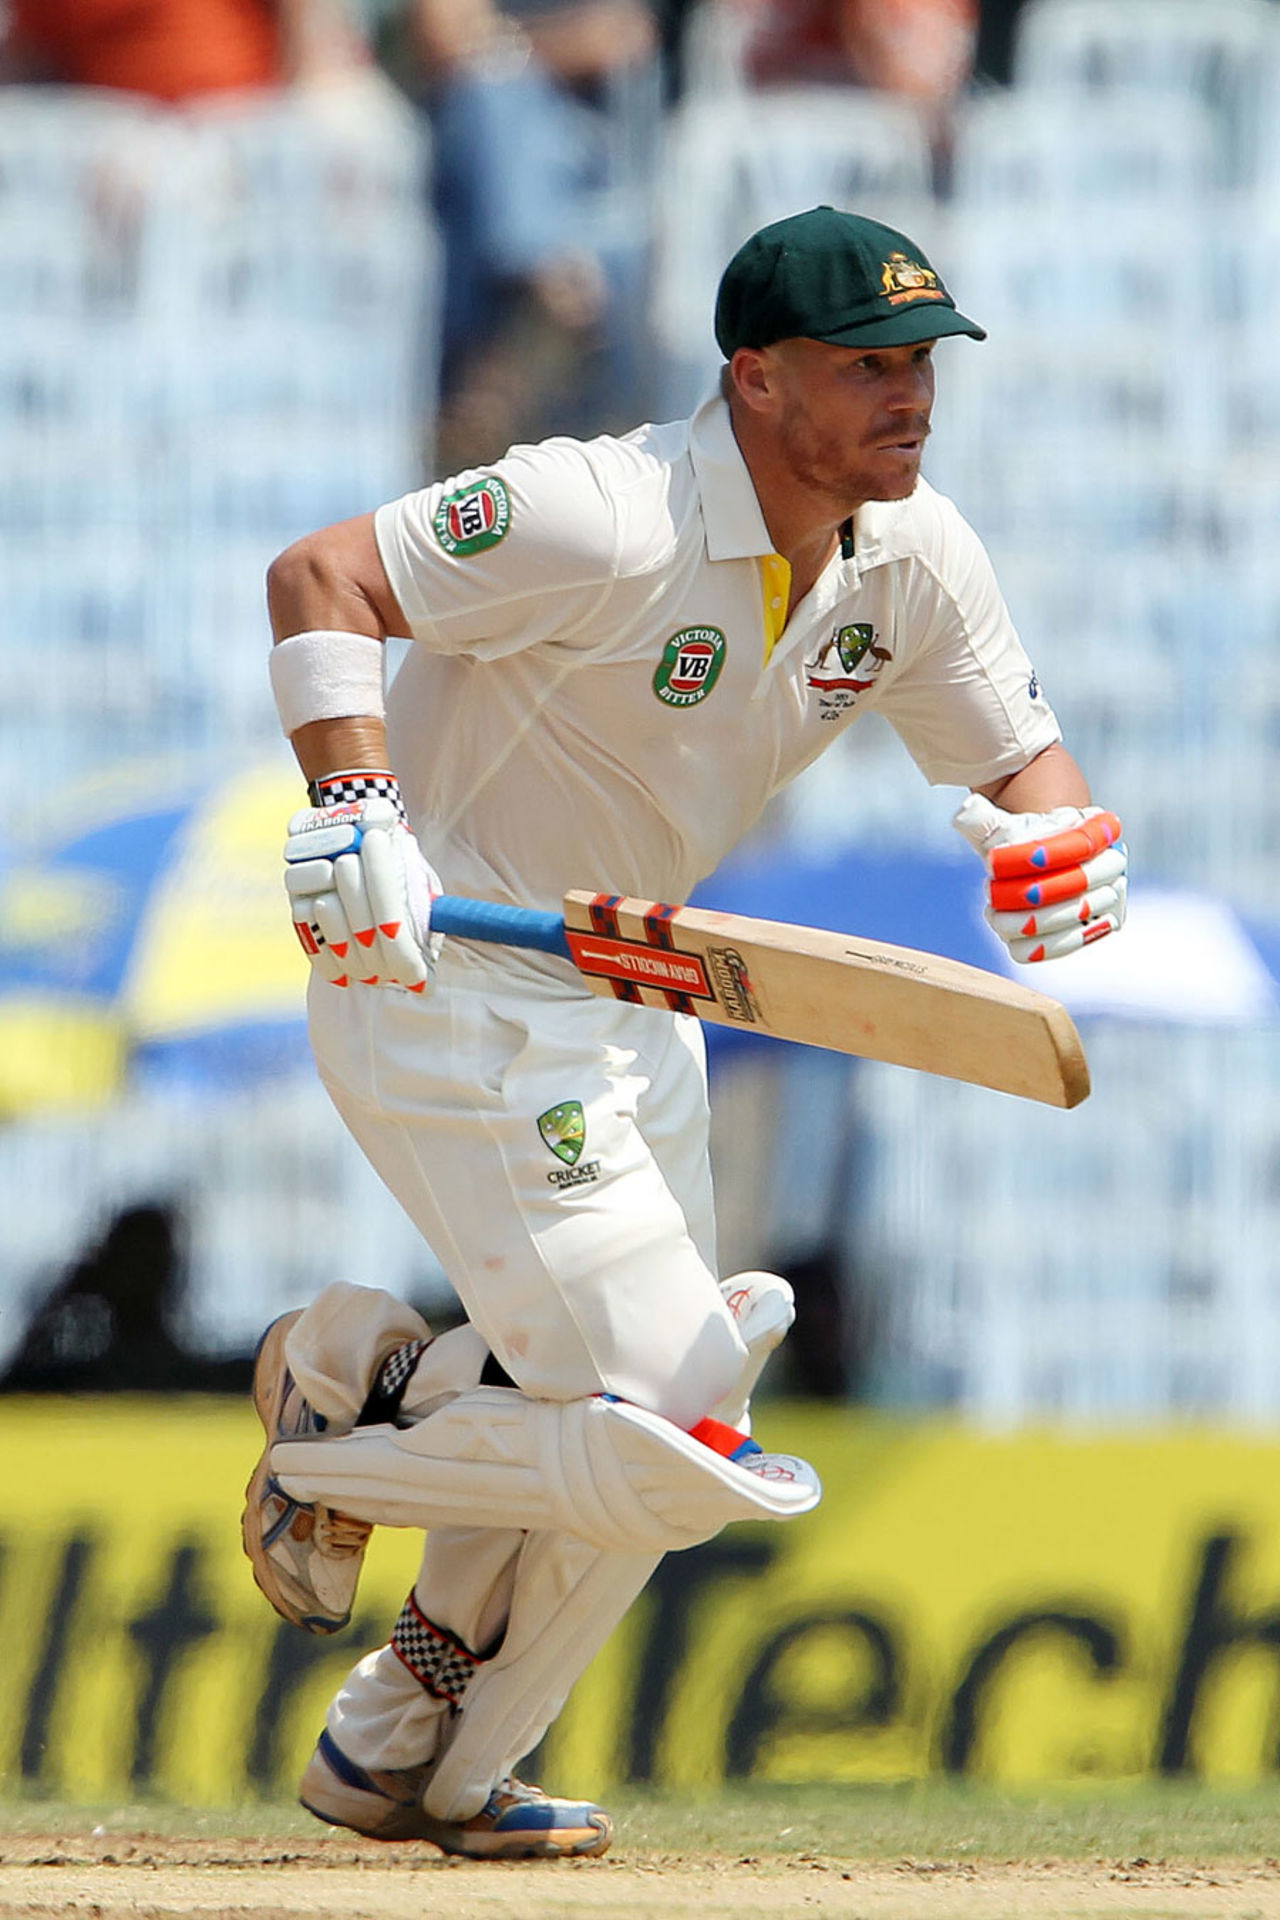 David Warner takes a run on his way to a fifty, India v Australia, 1st Test, Chennai, 1st day, February 22, 2013